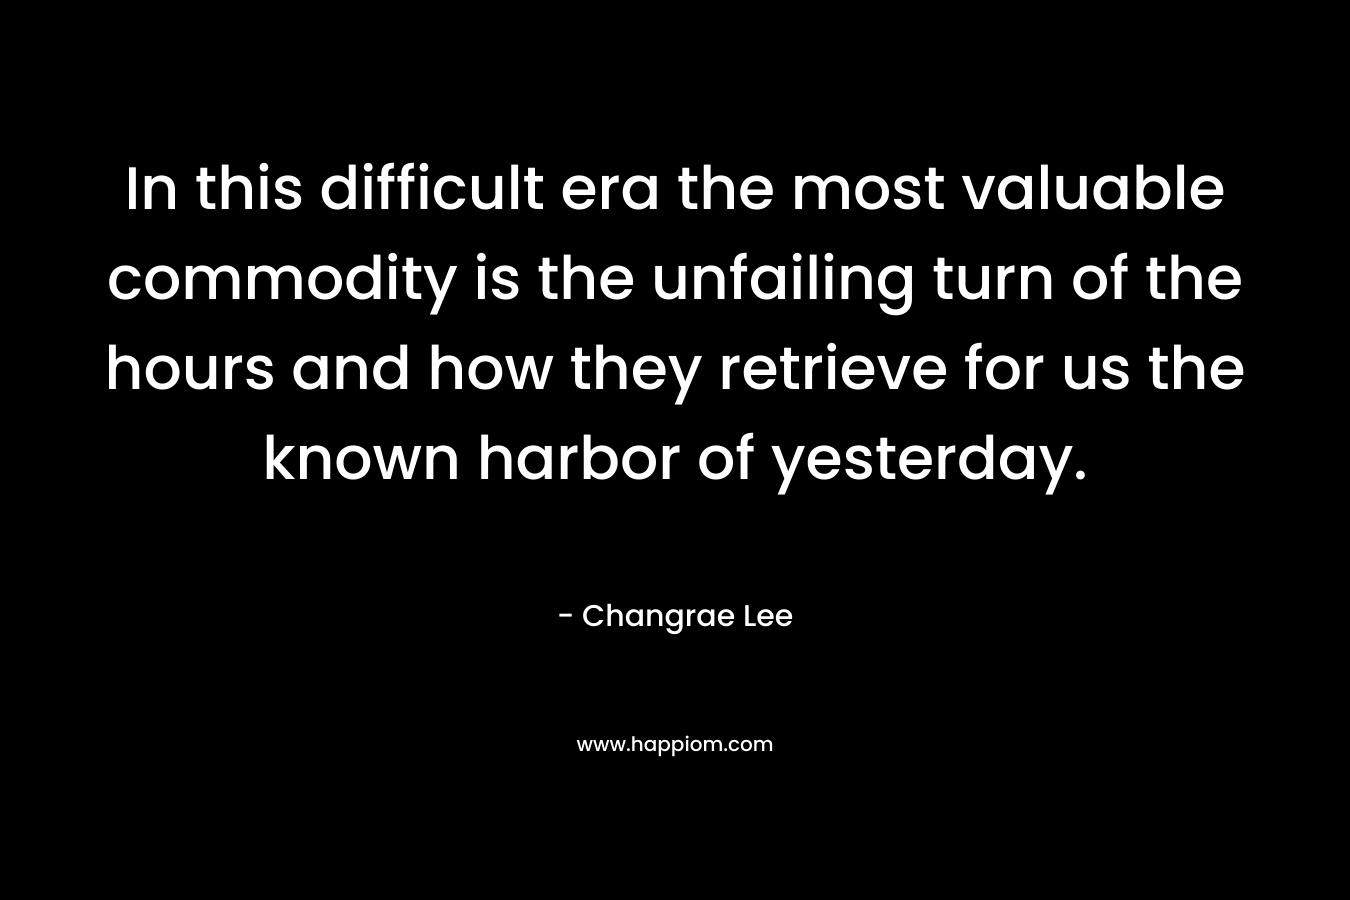 In this difficult era the most valuable commodity is the unfailing turn of the hours and how they retrieve for us the known harbor of yesterday.